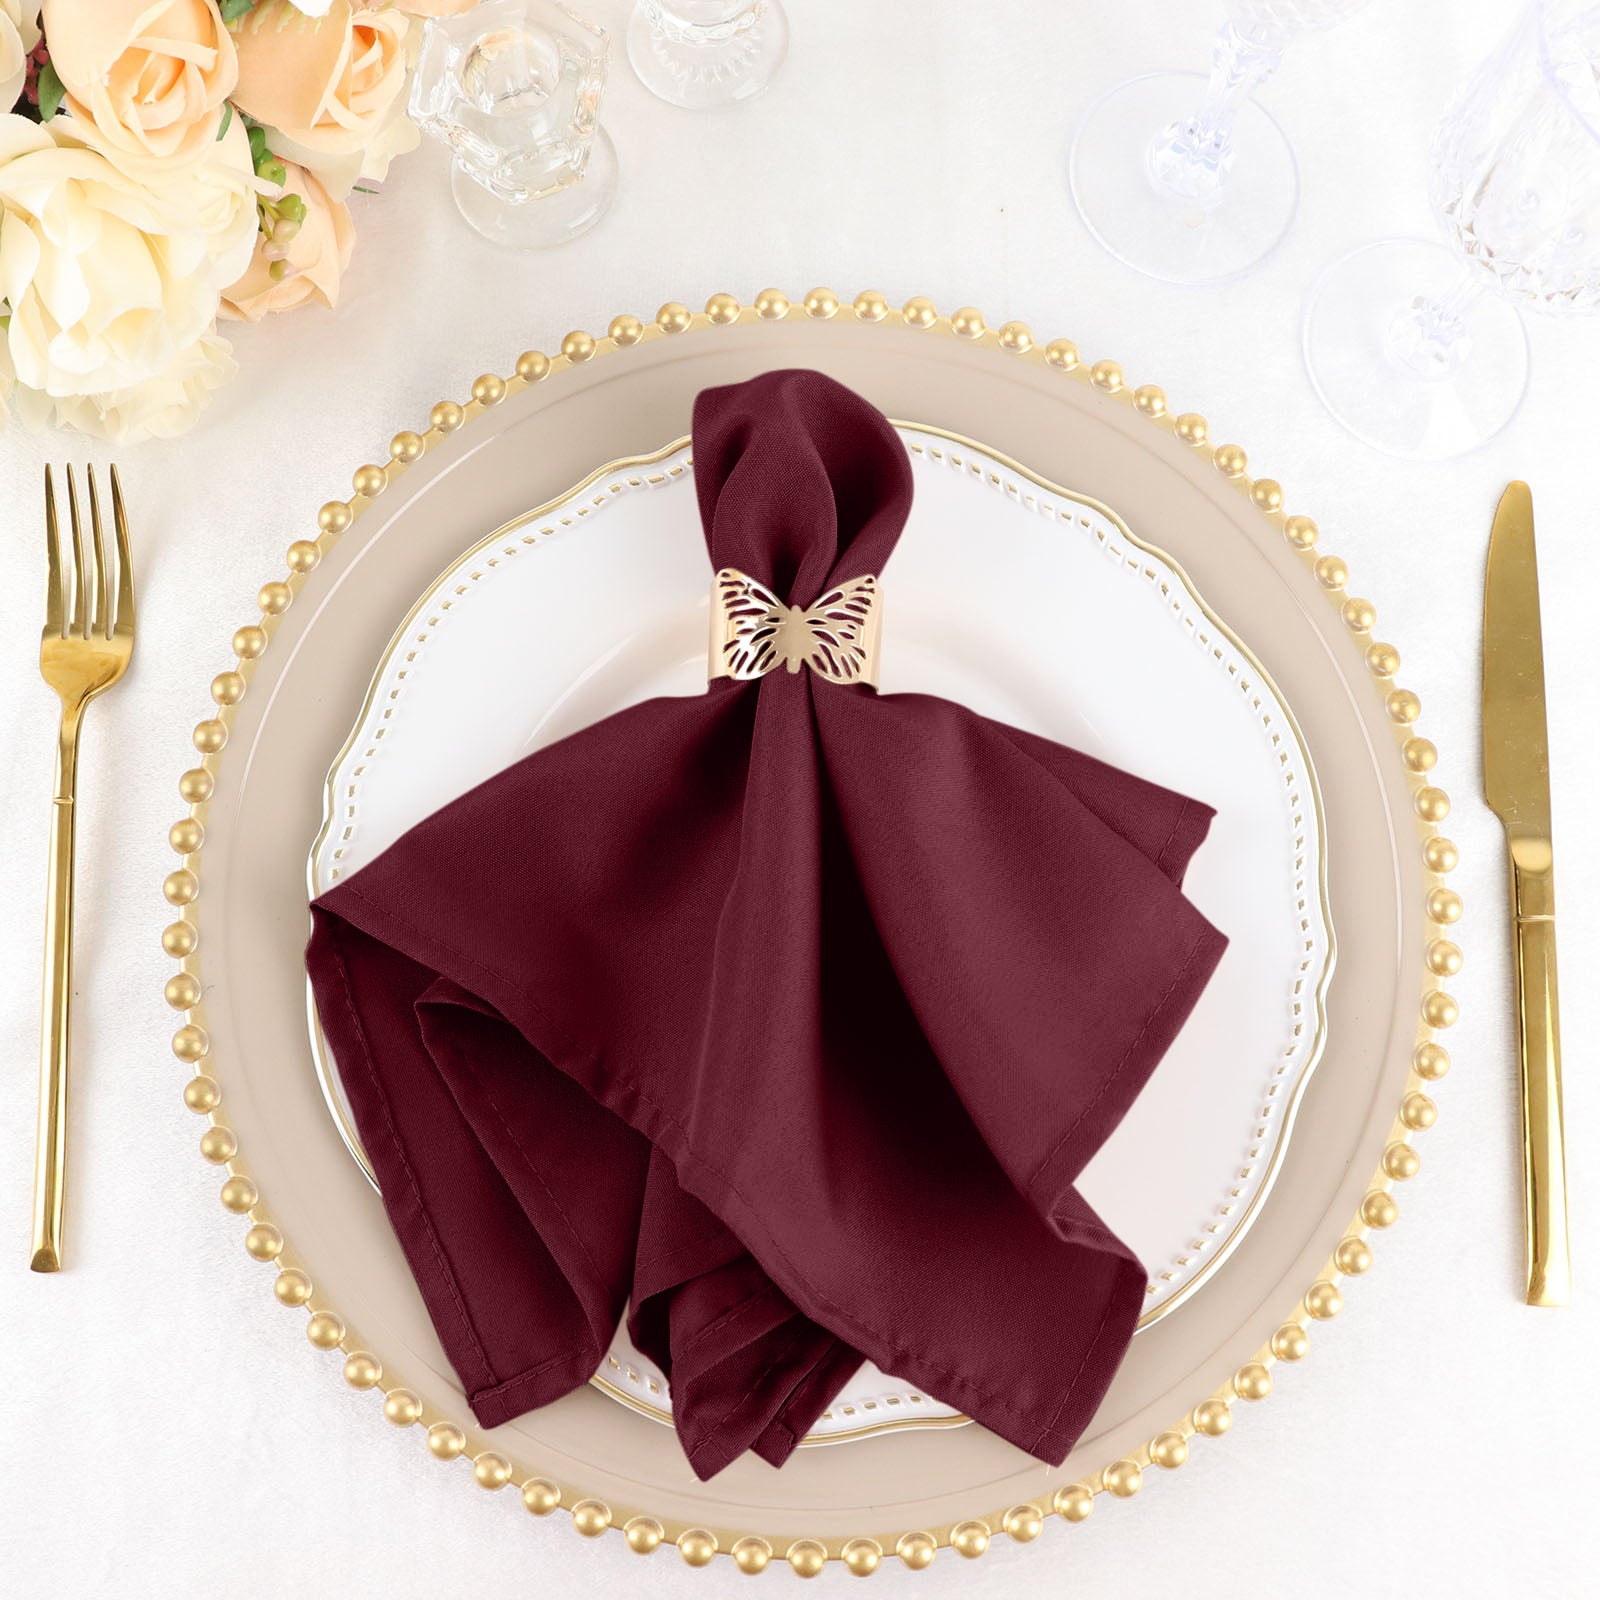 Preboun 24 Pcs Christmas Cloth Napkins 17 x 17 Inch Polyester Square Double  Folded Cloth Napkins Set of 24 with Hemmed Edges for Dinner Lunch